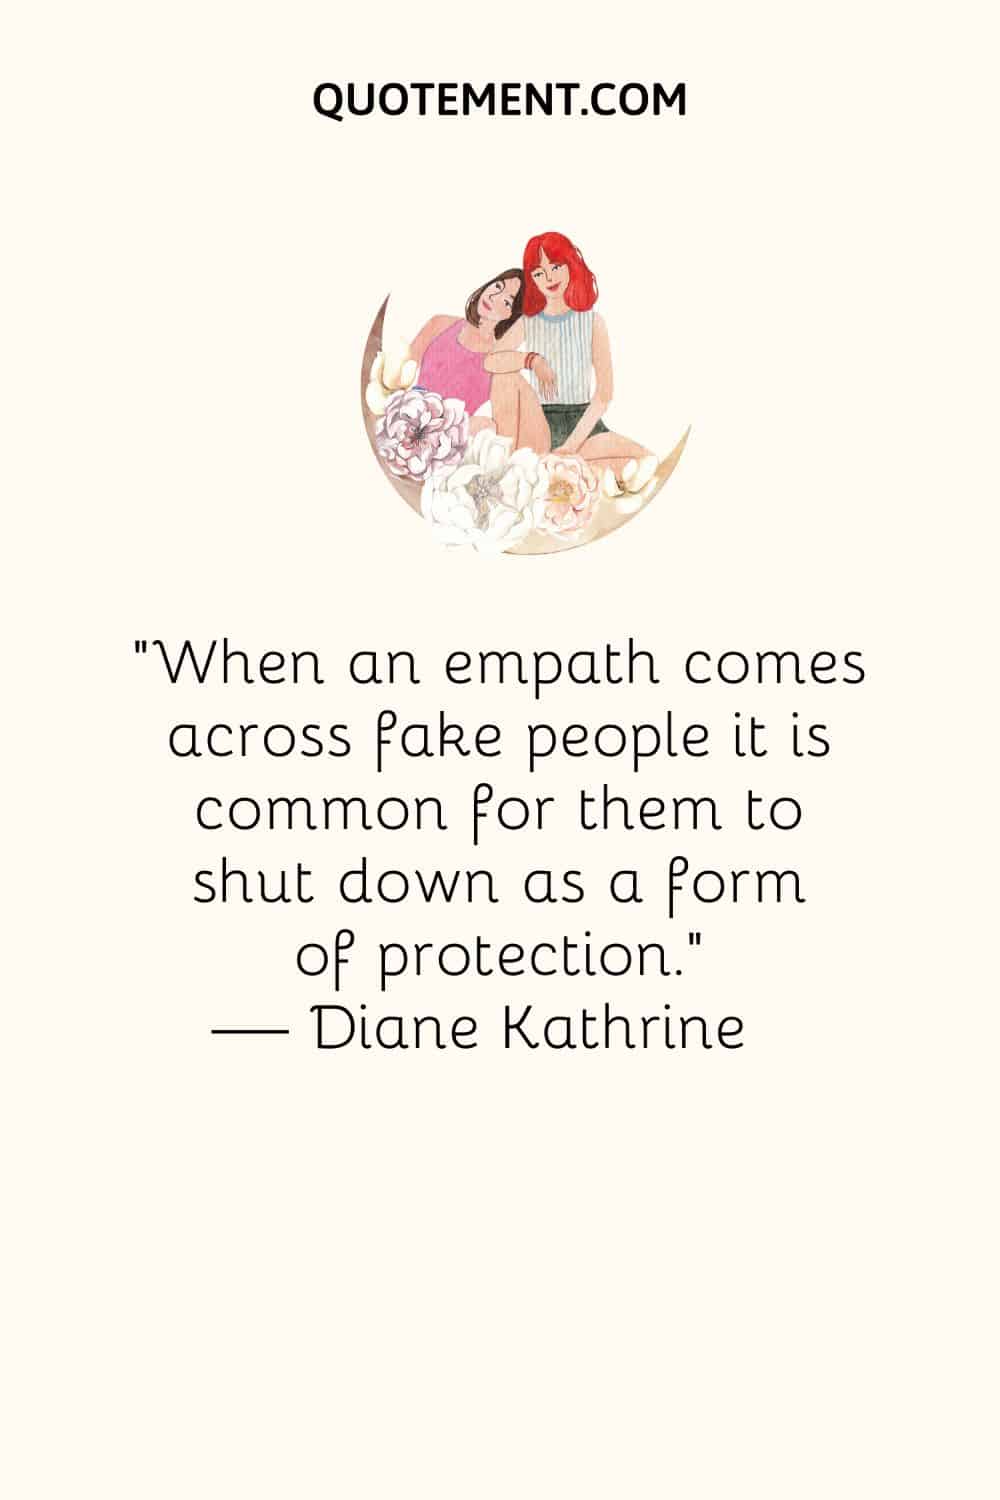 When an empath comes across fake people it is common for them to shut down as a form of protection